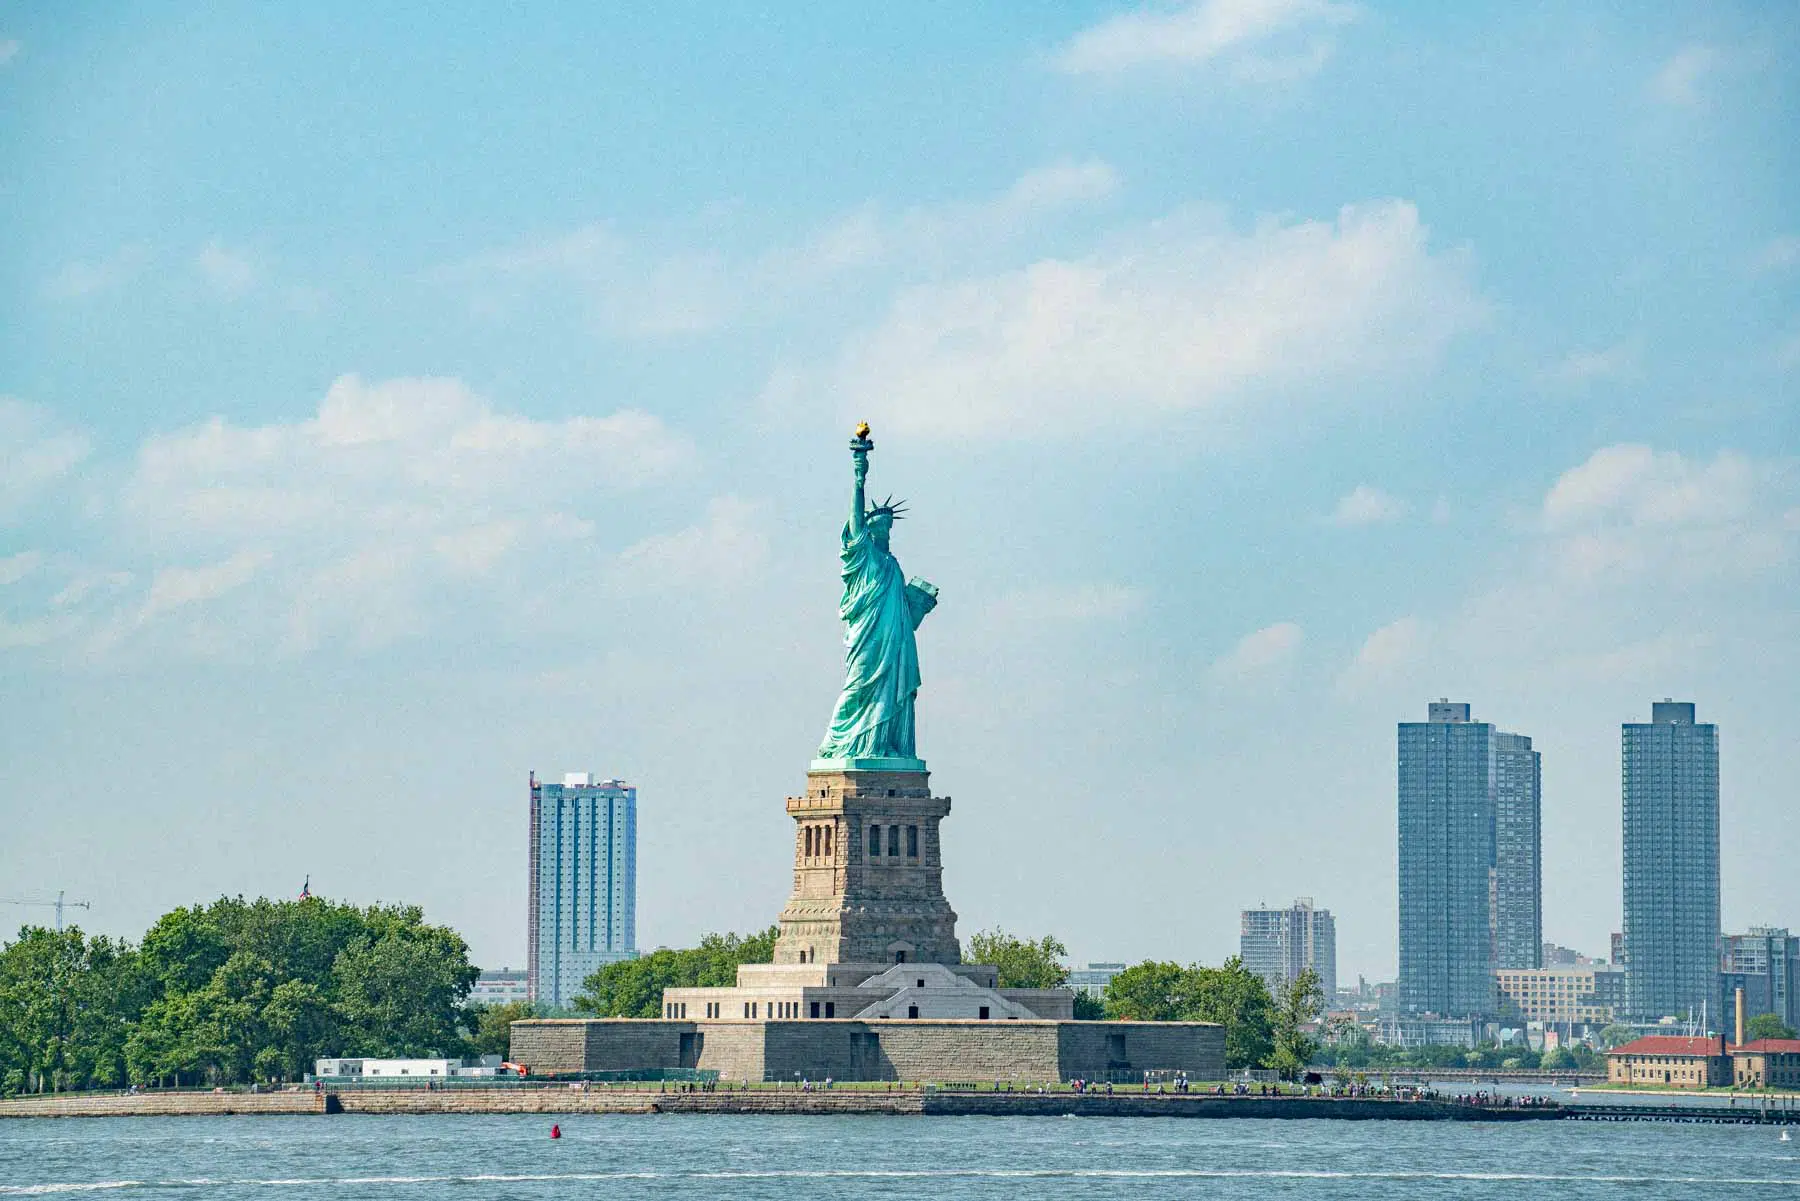 Buying fake tickets to the Statue of Liberty, tourist traps in New York City